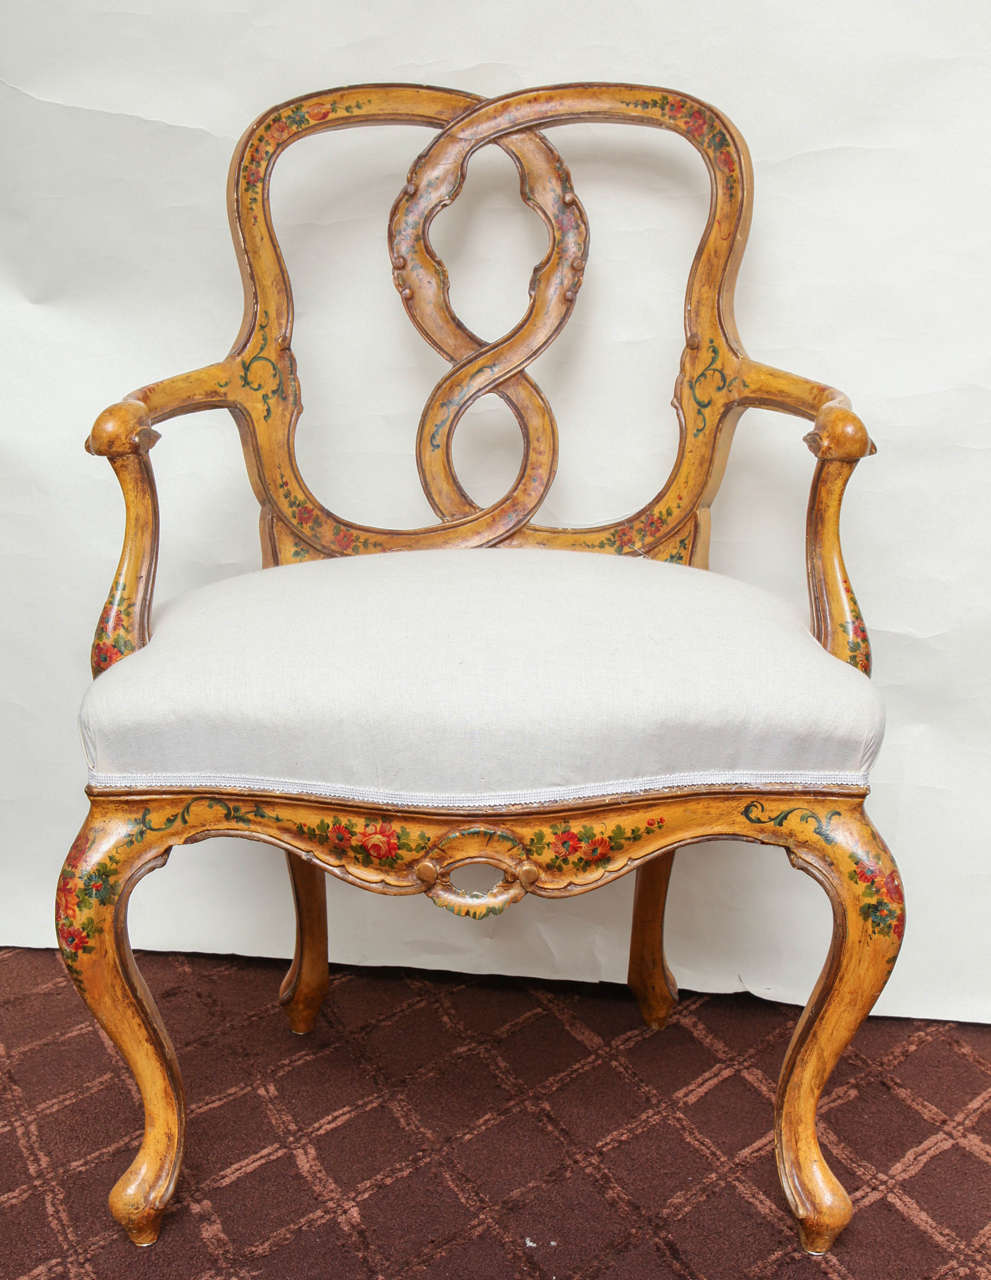 A pair of Italian Rococo style open armchairs, the chair back with arched frame and upholstered seat supported by cabriole legs and pierced carved apron. The frames decorated overall with hand-painted floral motifs on a yellow ground.